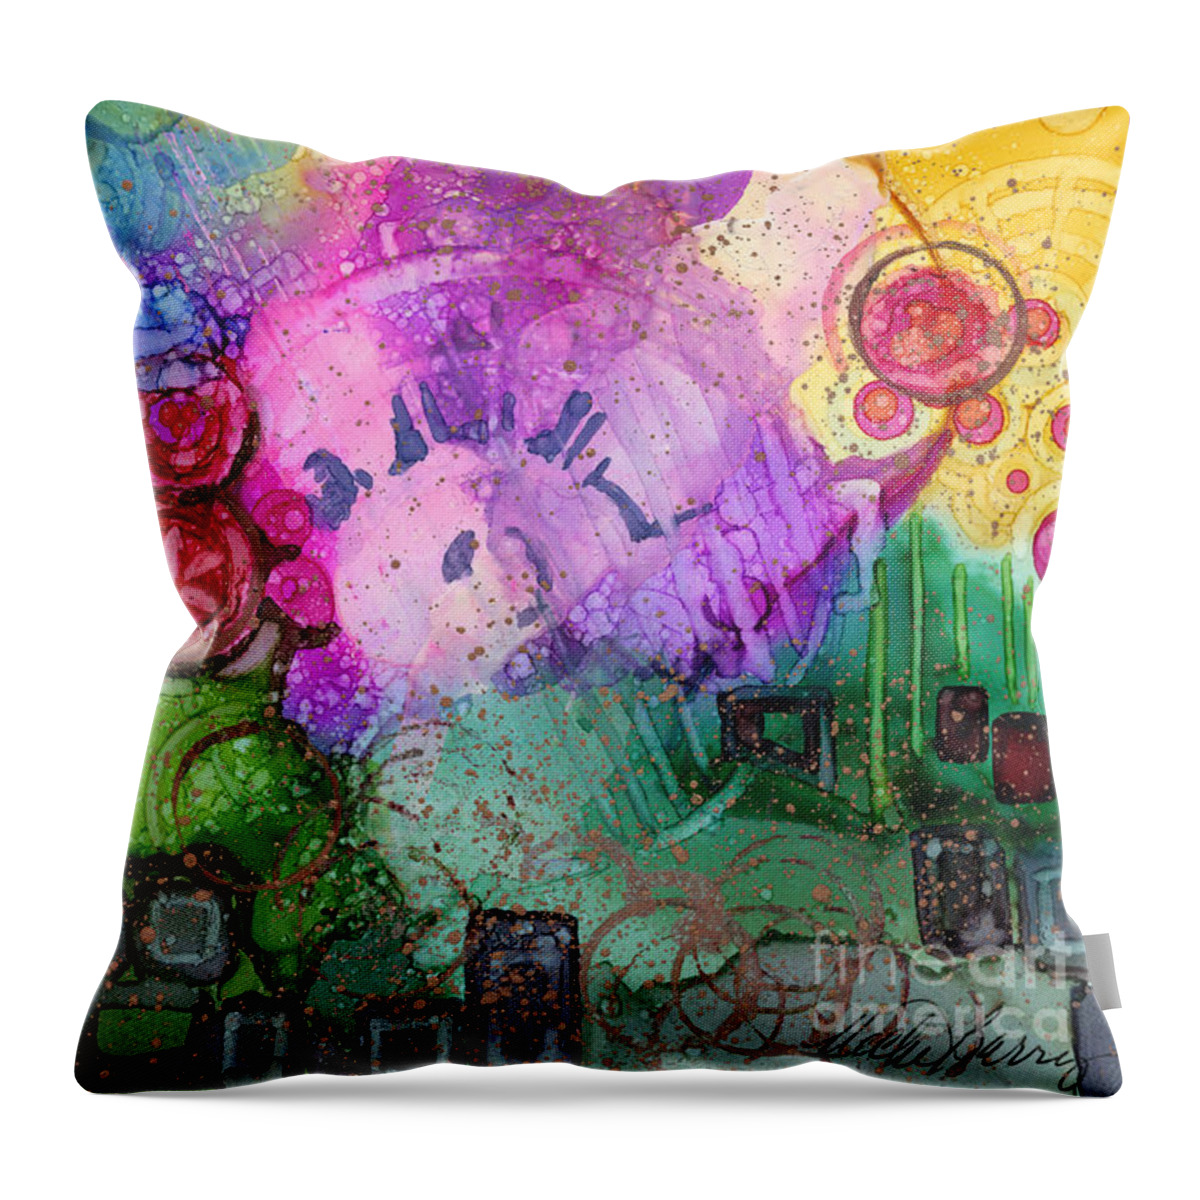 Alcohol Ink Throw Pillow featuring the painting Sometimes It's Confusing by Vicki Baun Barry